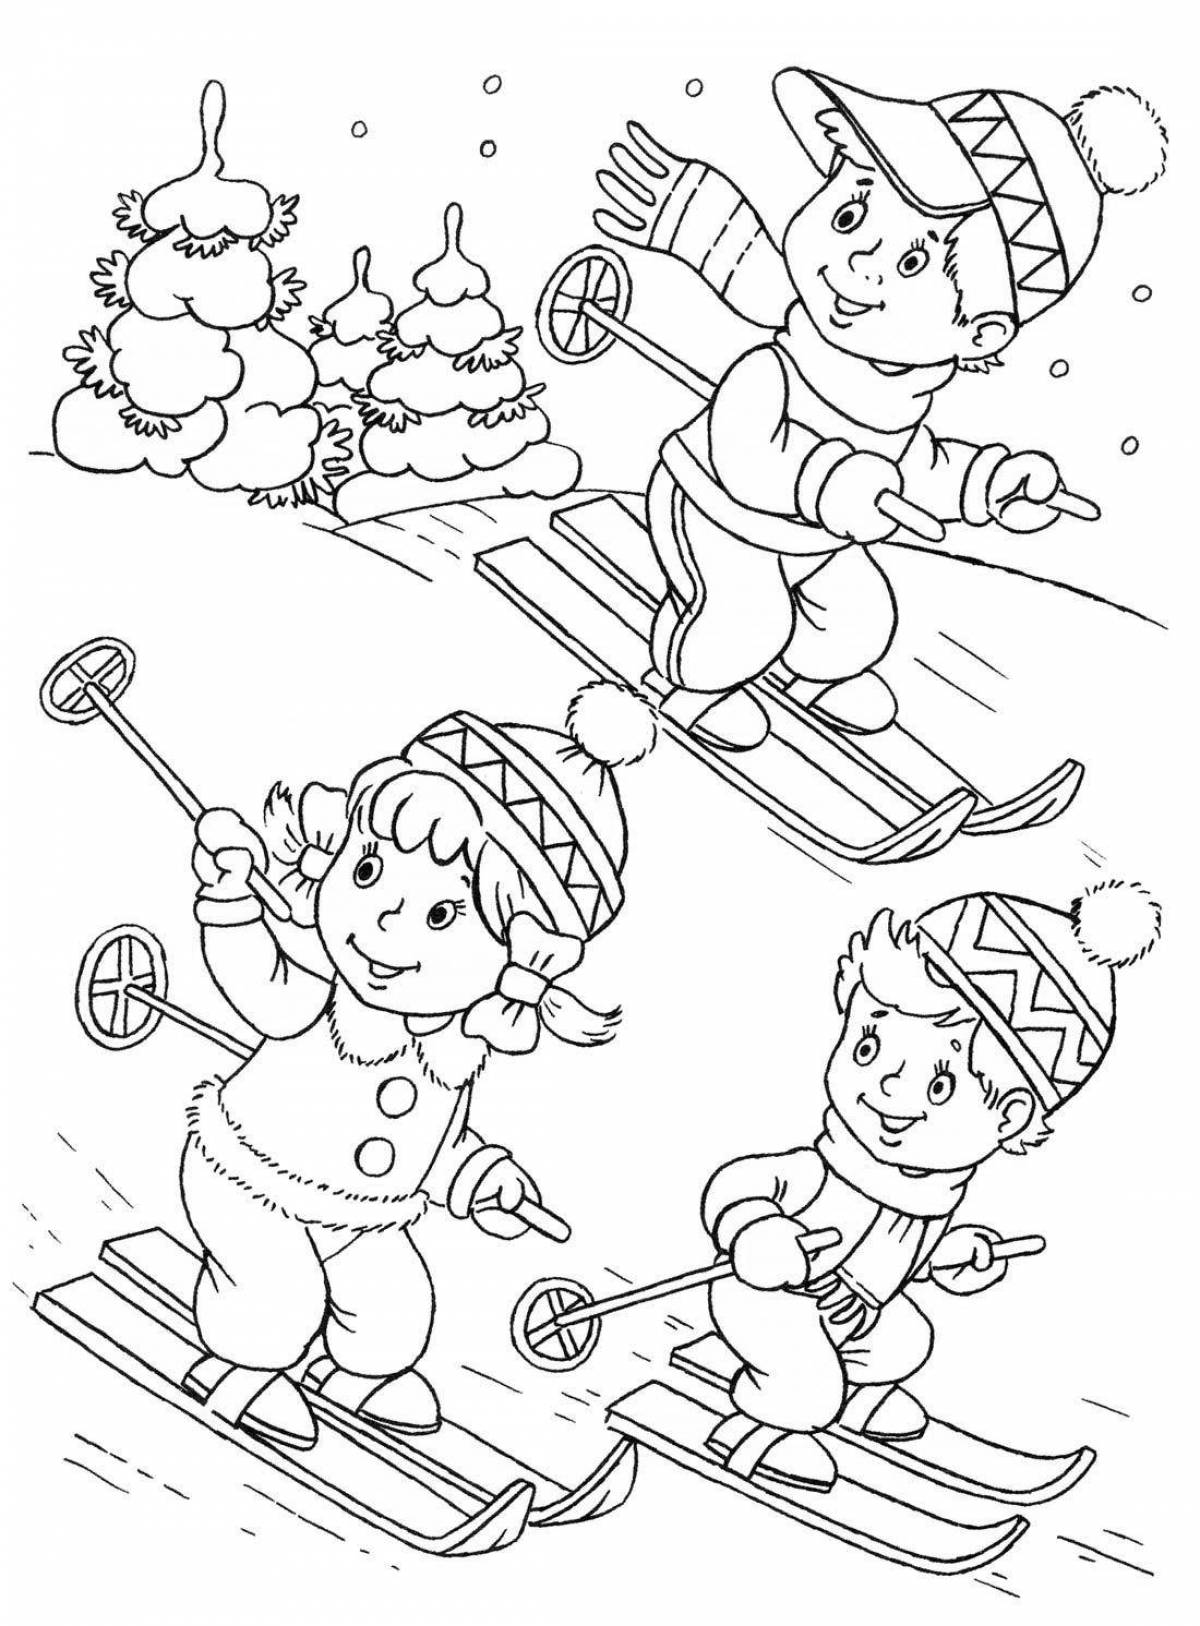 Amazing winter coloring book for kids 2-3 years old